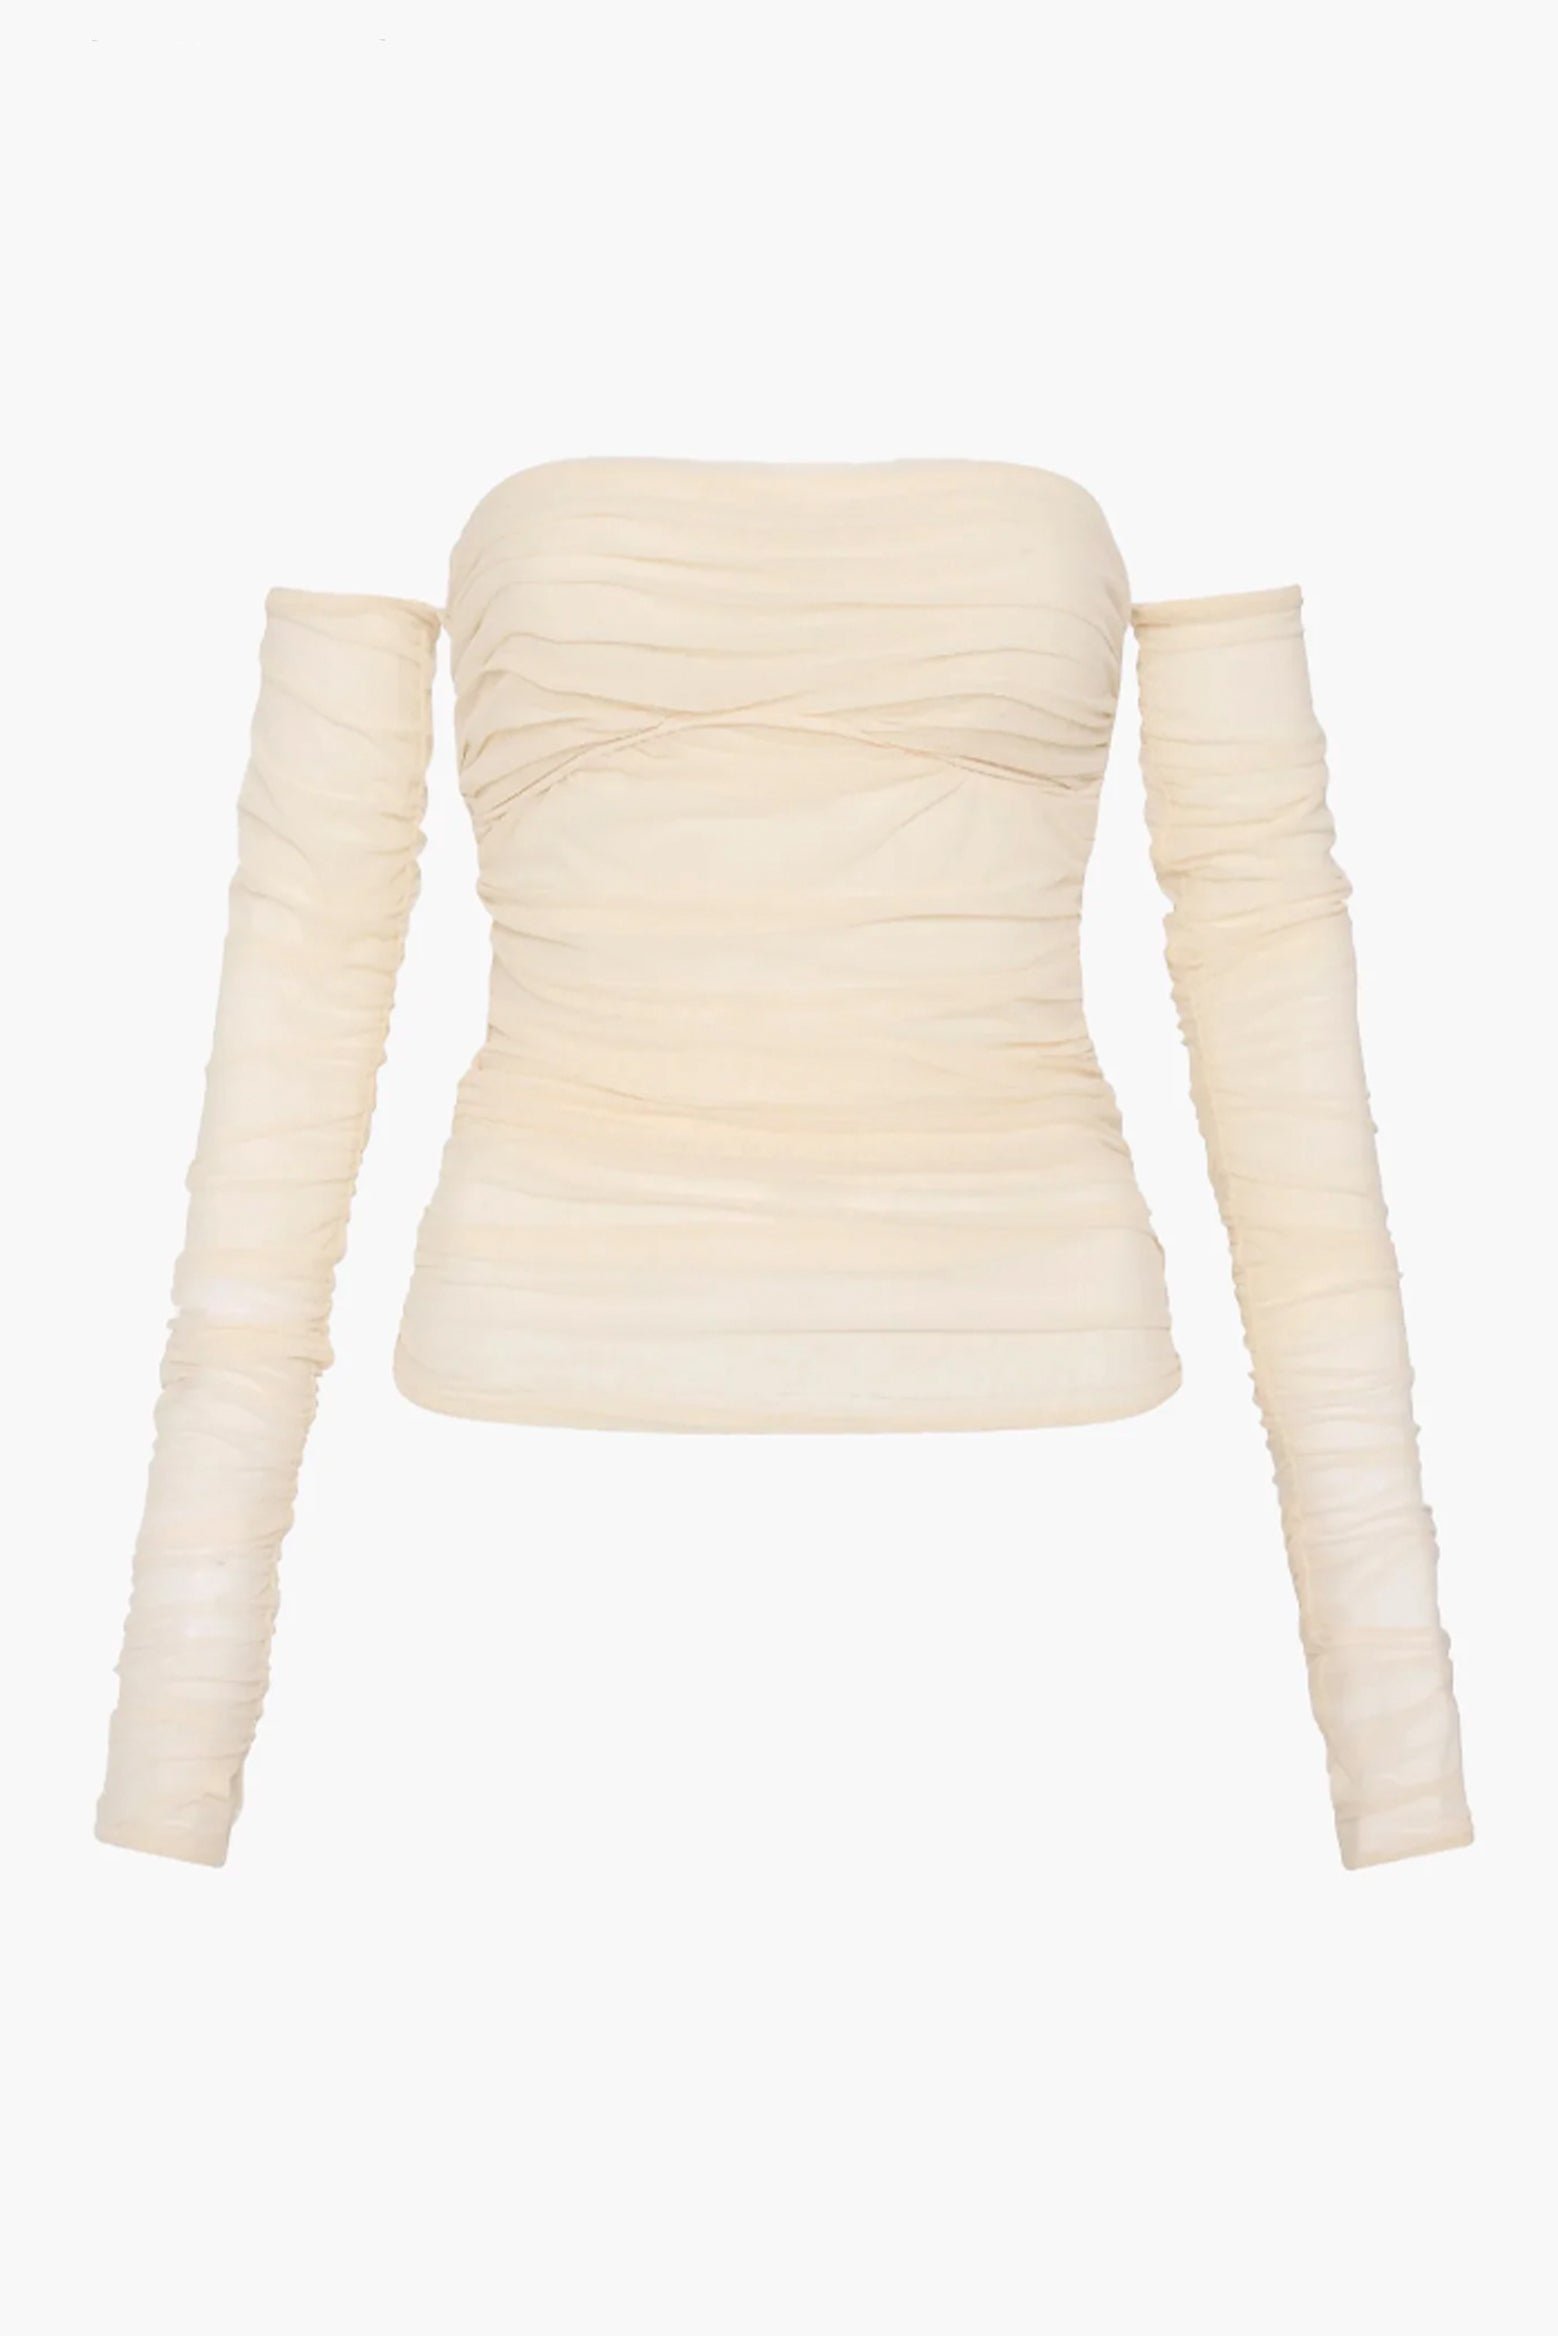 SIR Jacques Off Shoulder Top in Ecru available at The New Trend Australia.